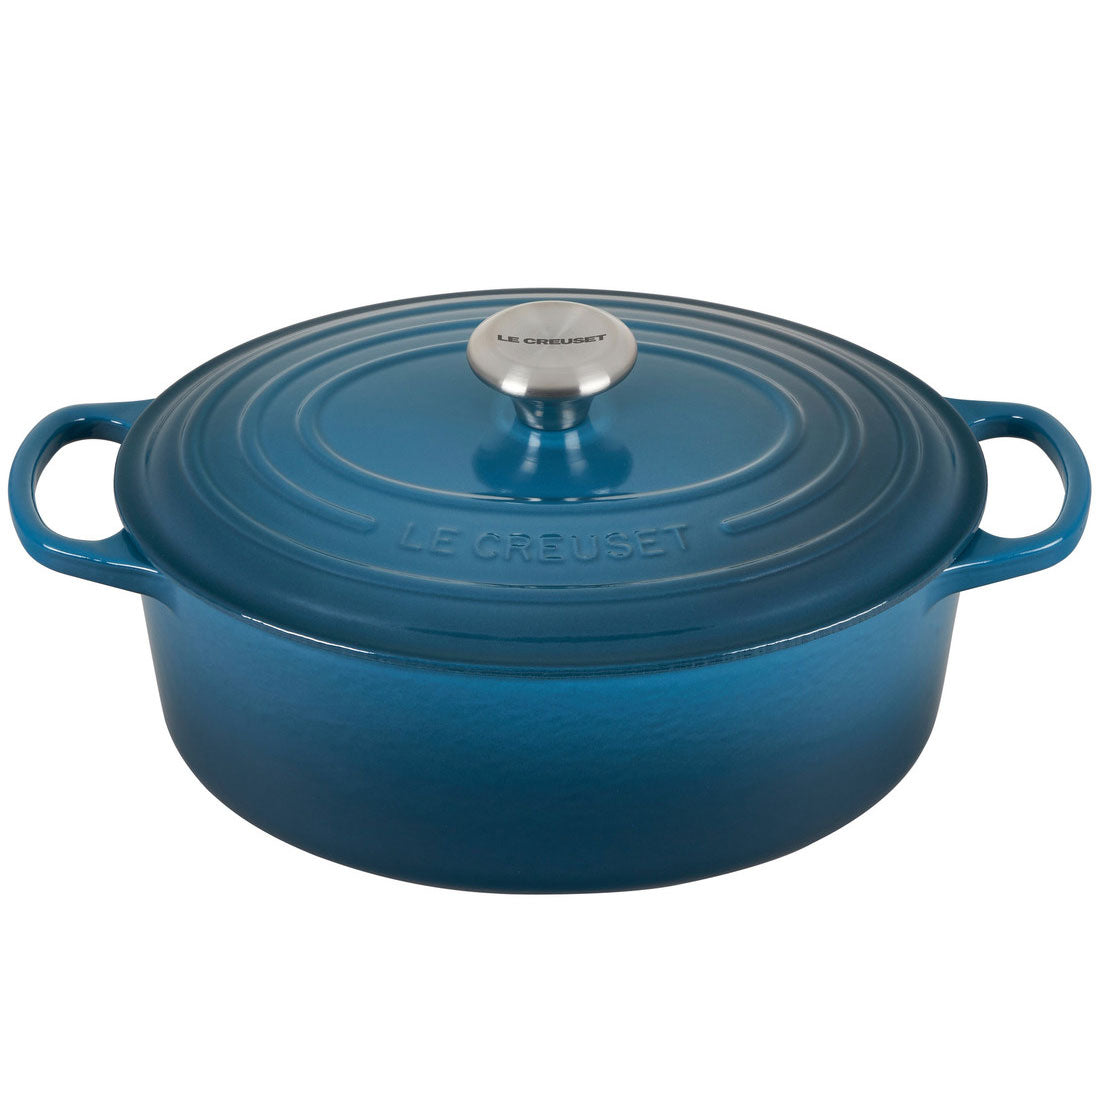 at Home 5-Quart Enameled Cast Iron Dutch Oven, Teal